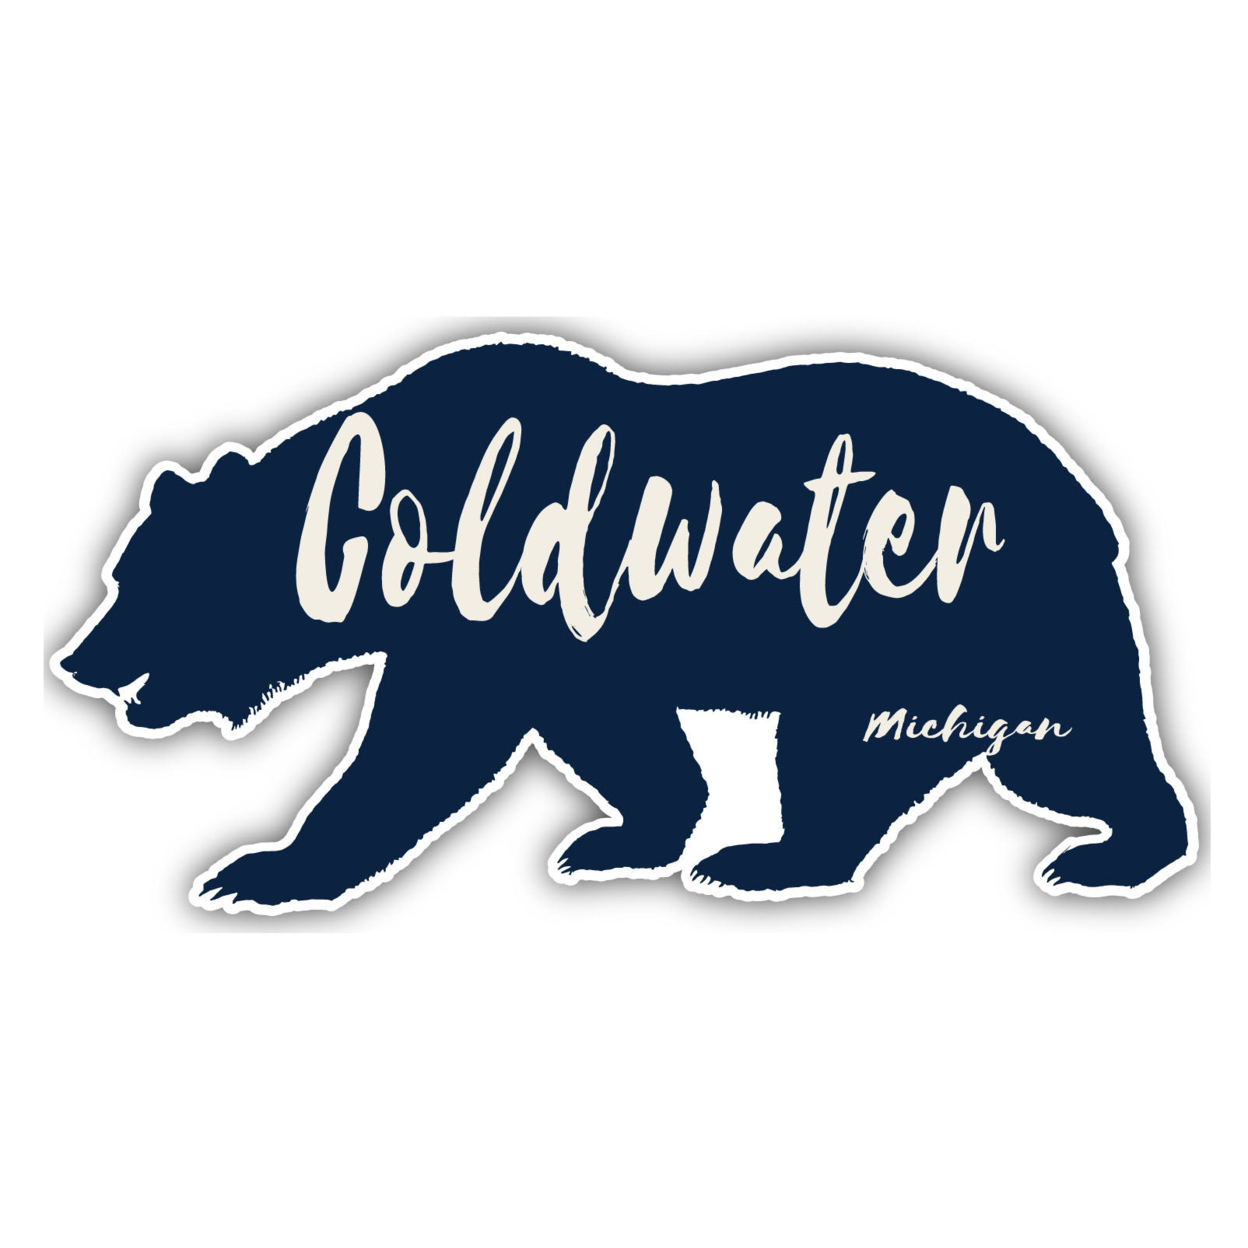 Coldwater Michigan Souvenir Decorative Stickers (Choose Theme And Size) - 4-Pack, 10-Inch, Bear